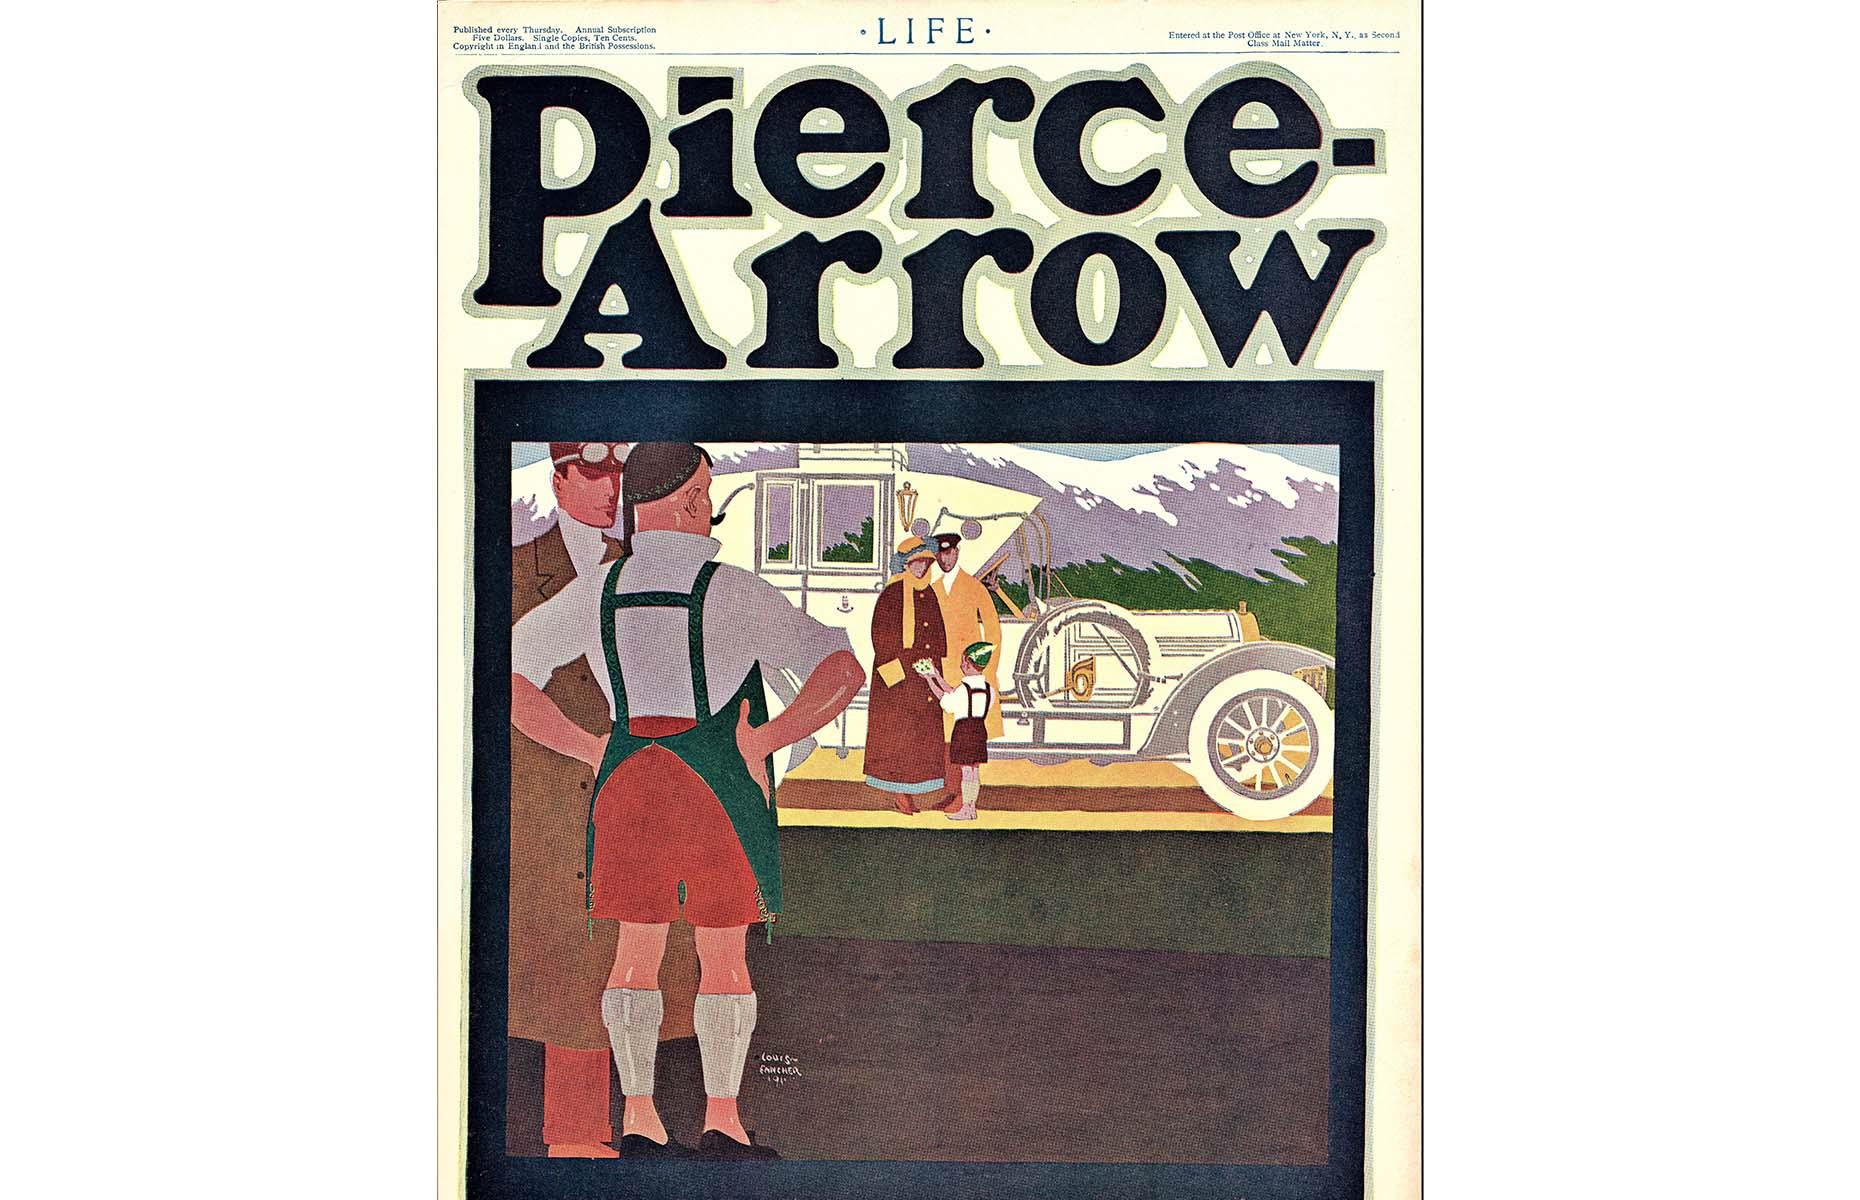 <p>Often pegged as the first-ever RV, the Pierce-Arrow Touring Landau debuted in 1910. Only the richest in society could afford this whizzy automobile, which included a fold-out bed, a stow-away sink and a chamber-pot toilet. This magazine advert dates to 1911.</p>  <p><strong><a href="http://bit.ly/3roL4wv">Love this? Follow our Facebook page for more travel inspiration</a></strong></p>